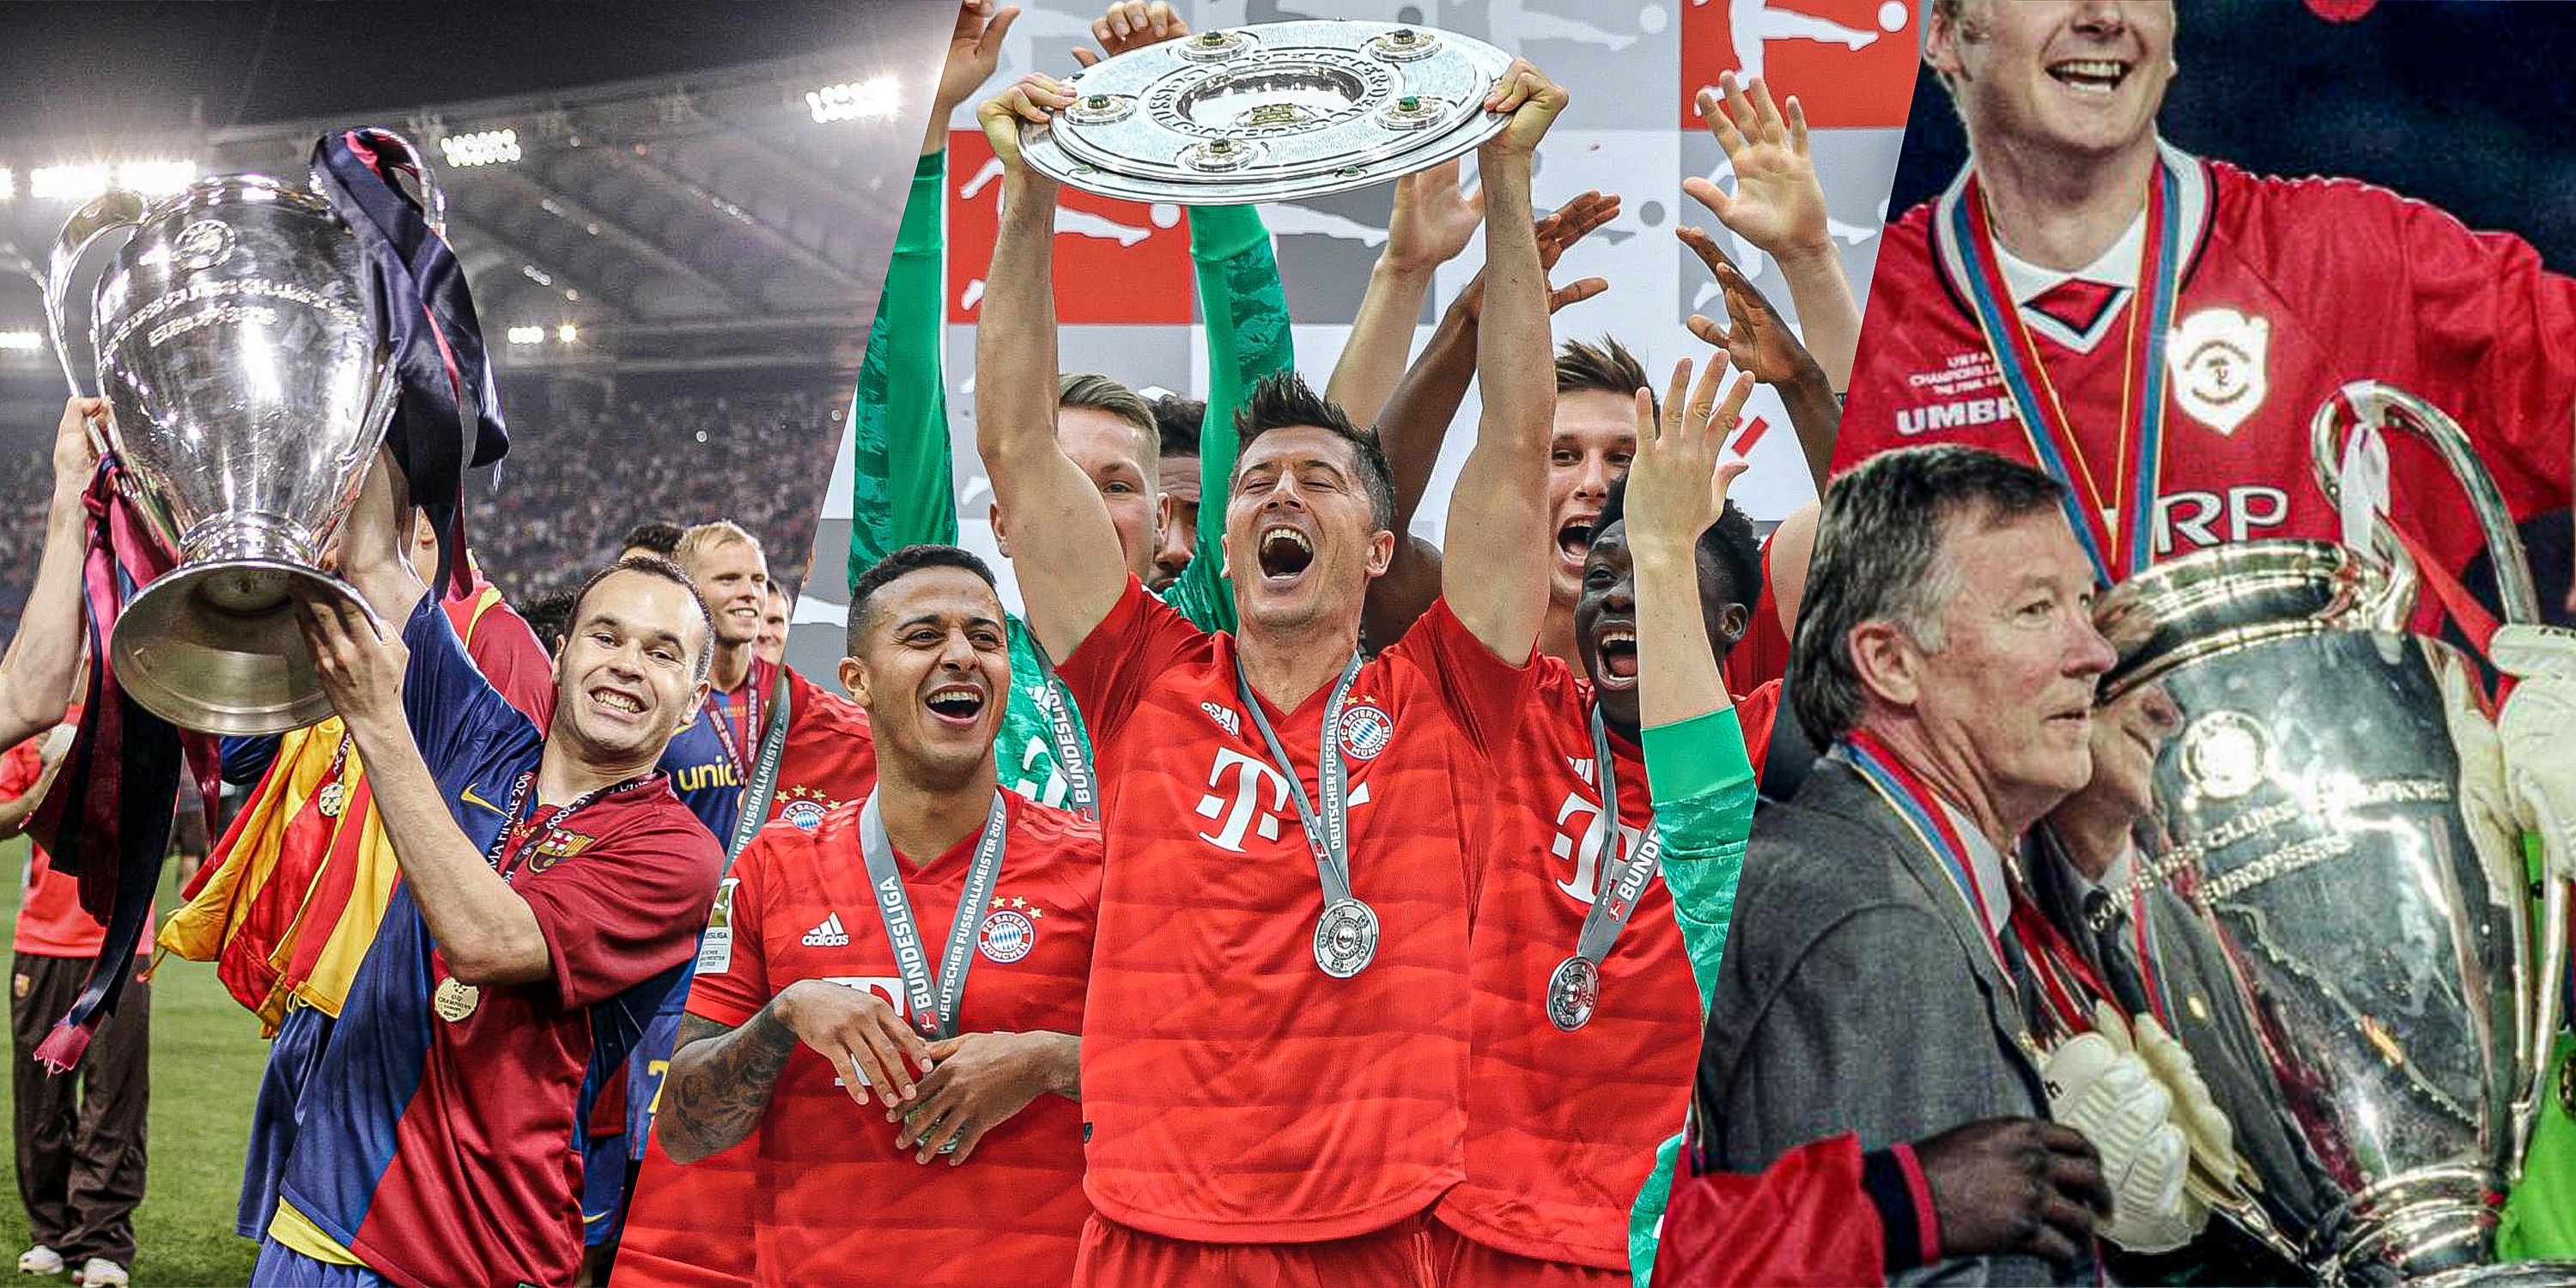 Every team to have won the treble in European football featuring Barcelona, Bayern Munich and Manchester United